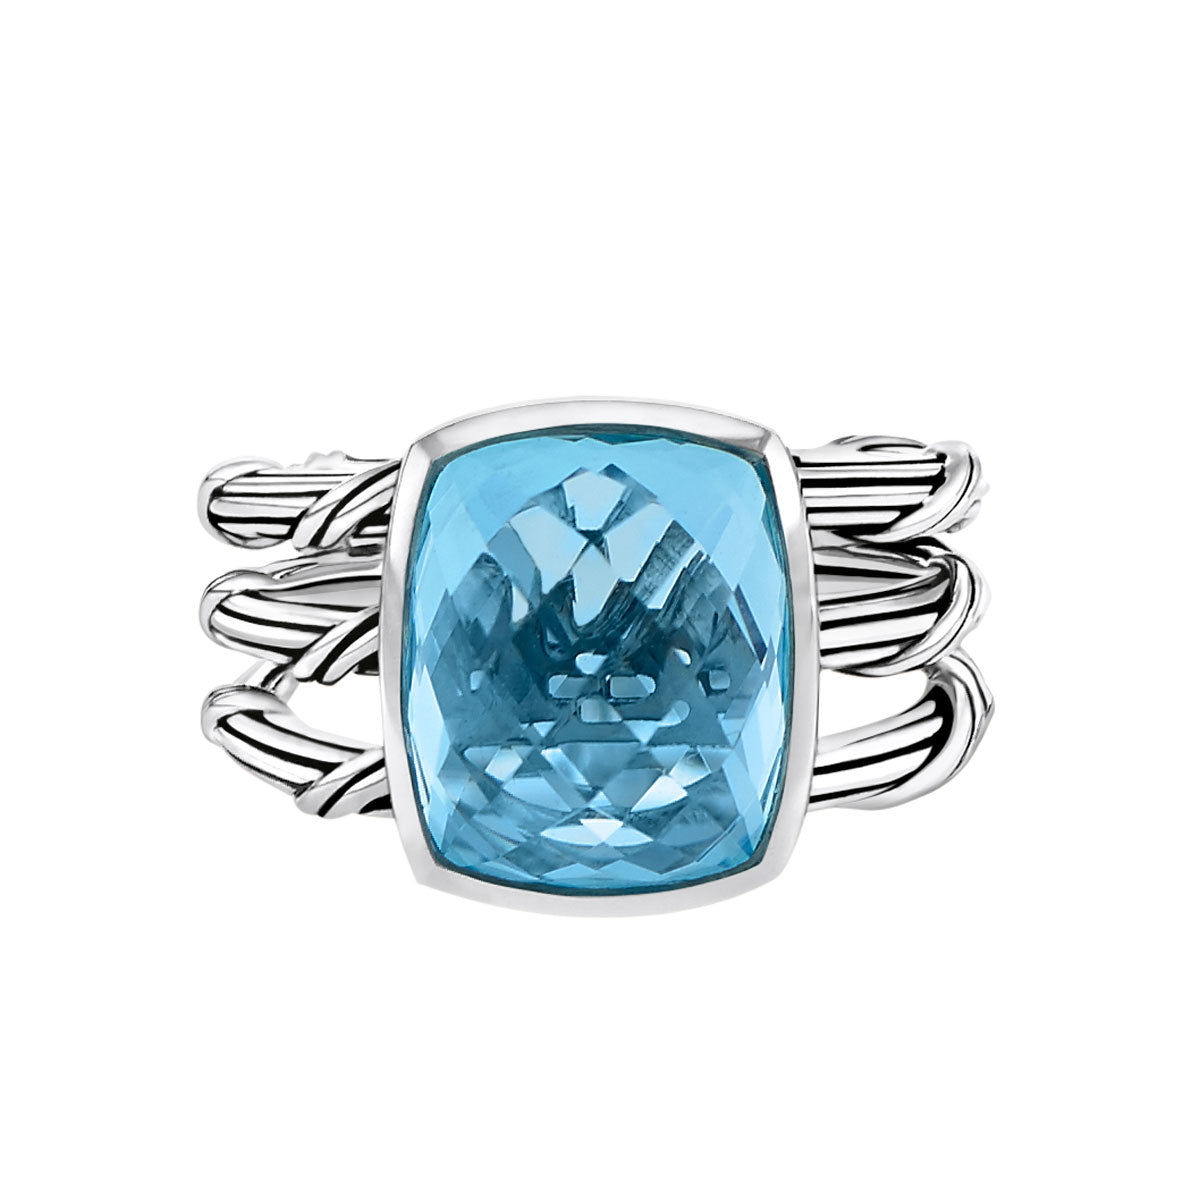 Fantasies Blue Topaz 3 Row Cocktail Ring in sterling silver